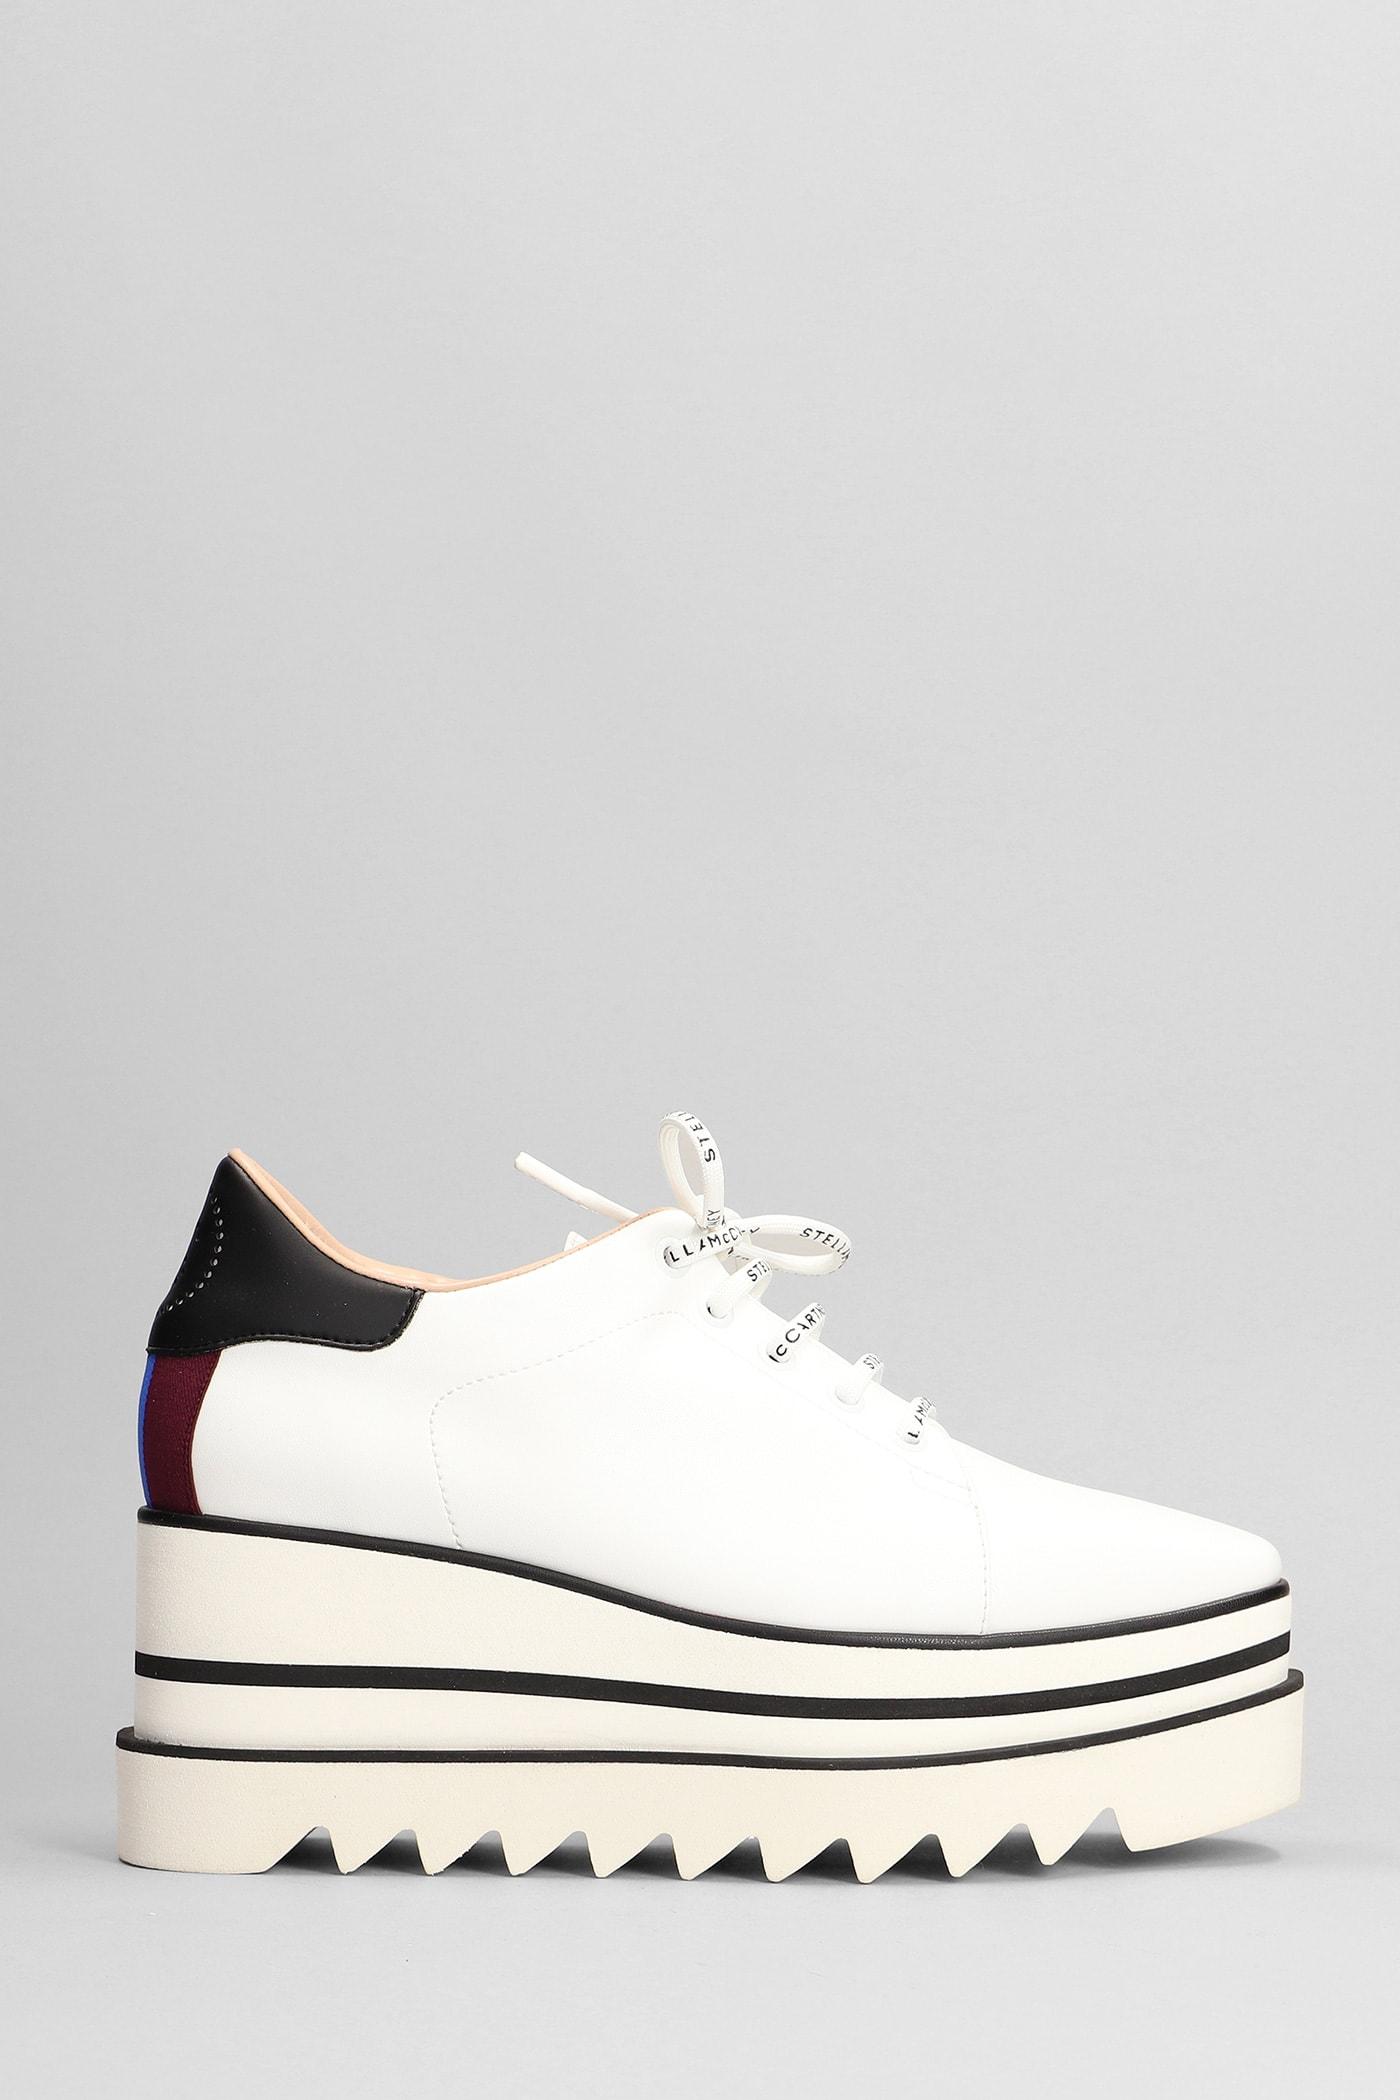 Stella McCartney Lace Up Shoes In Leather in White | Lyst